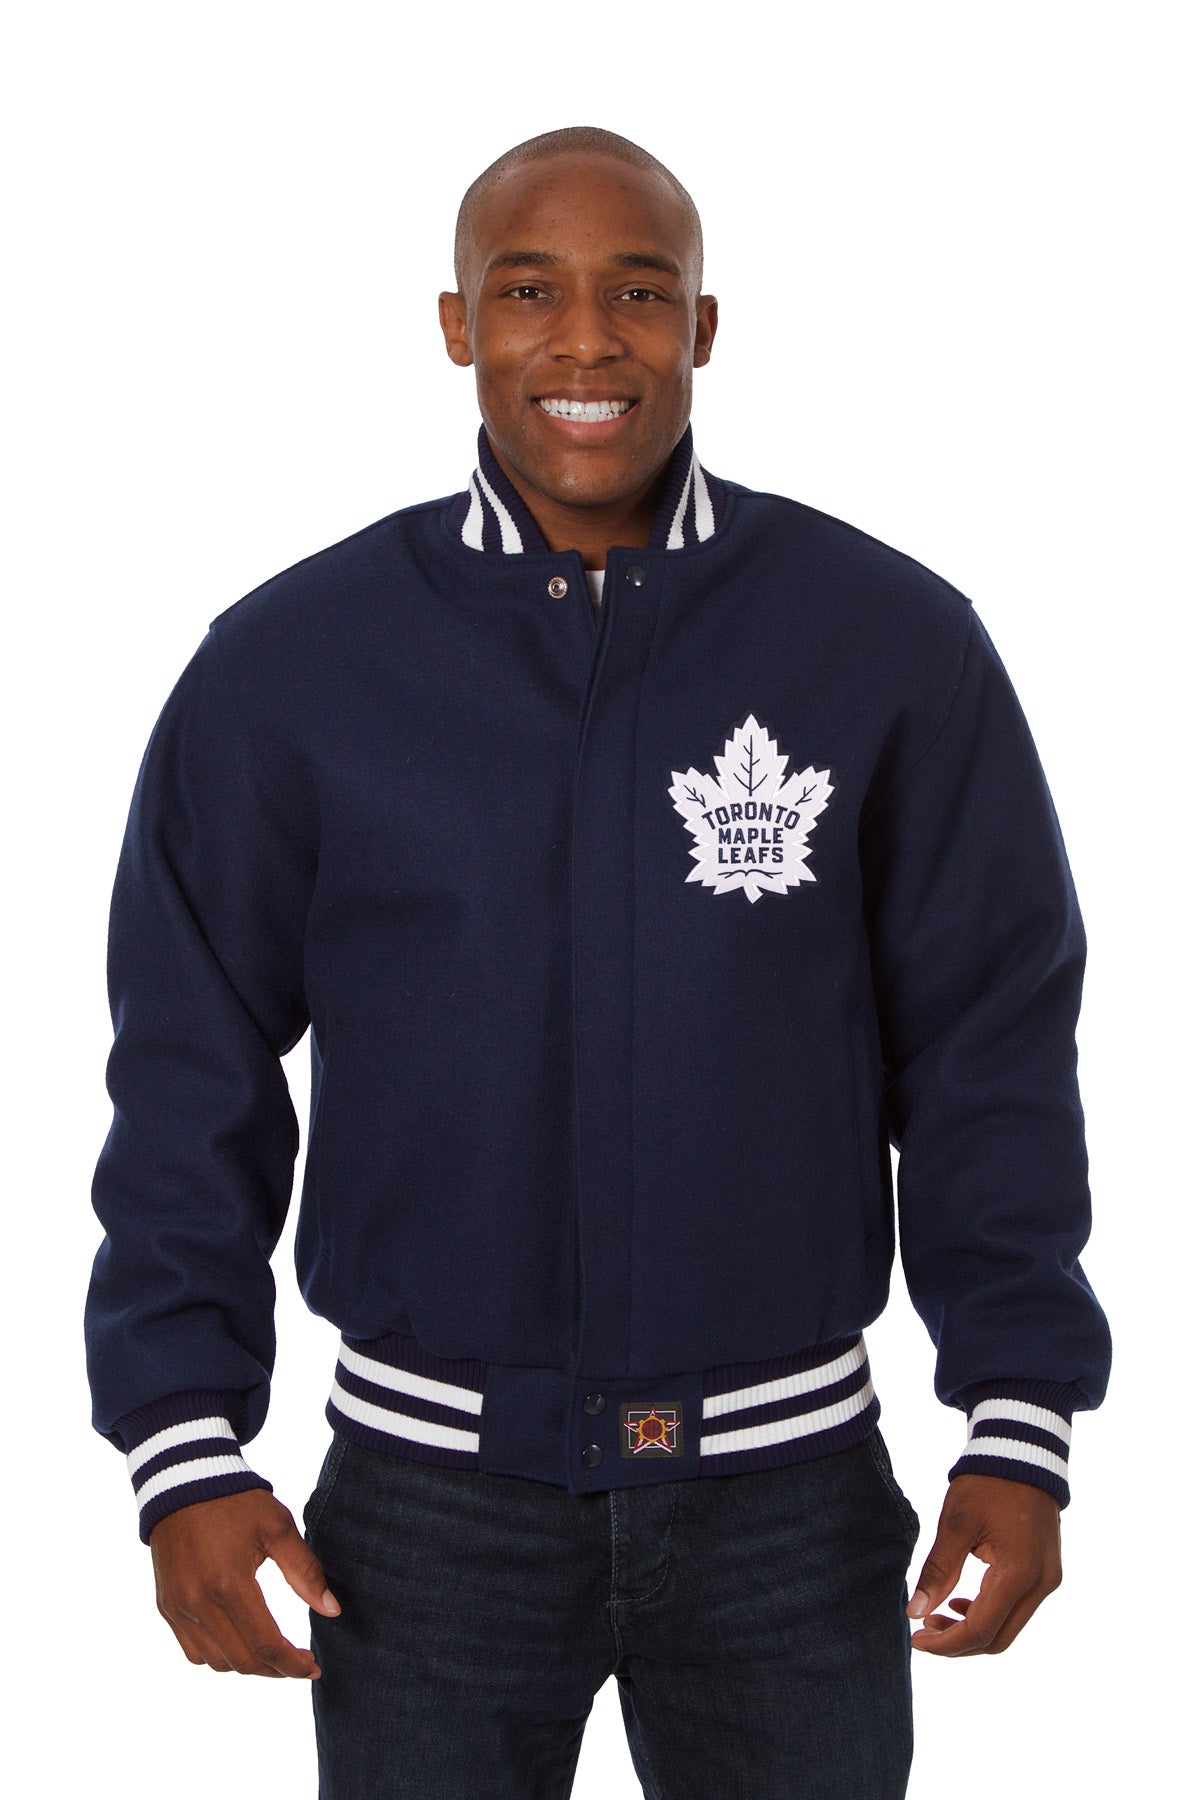 Toronto Maple Leafs Embroidered Wool Jacket